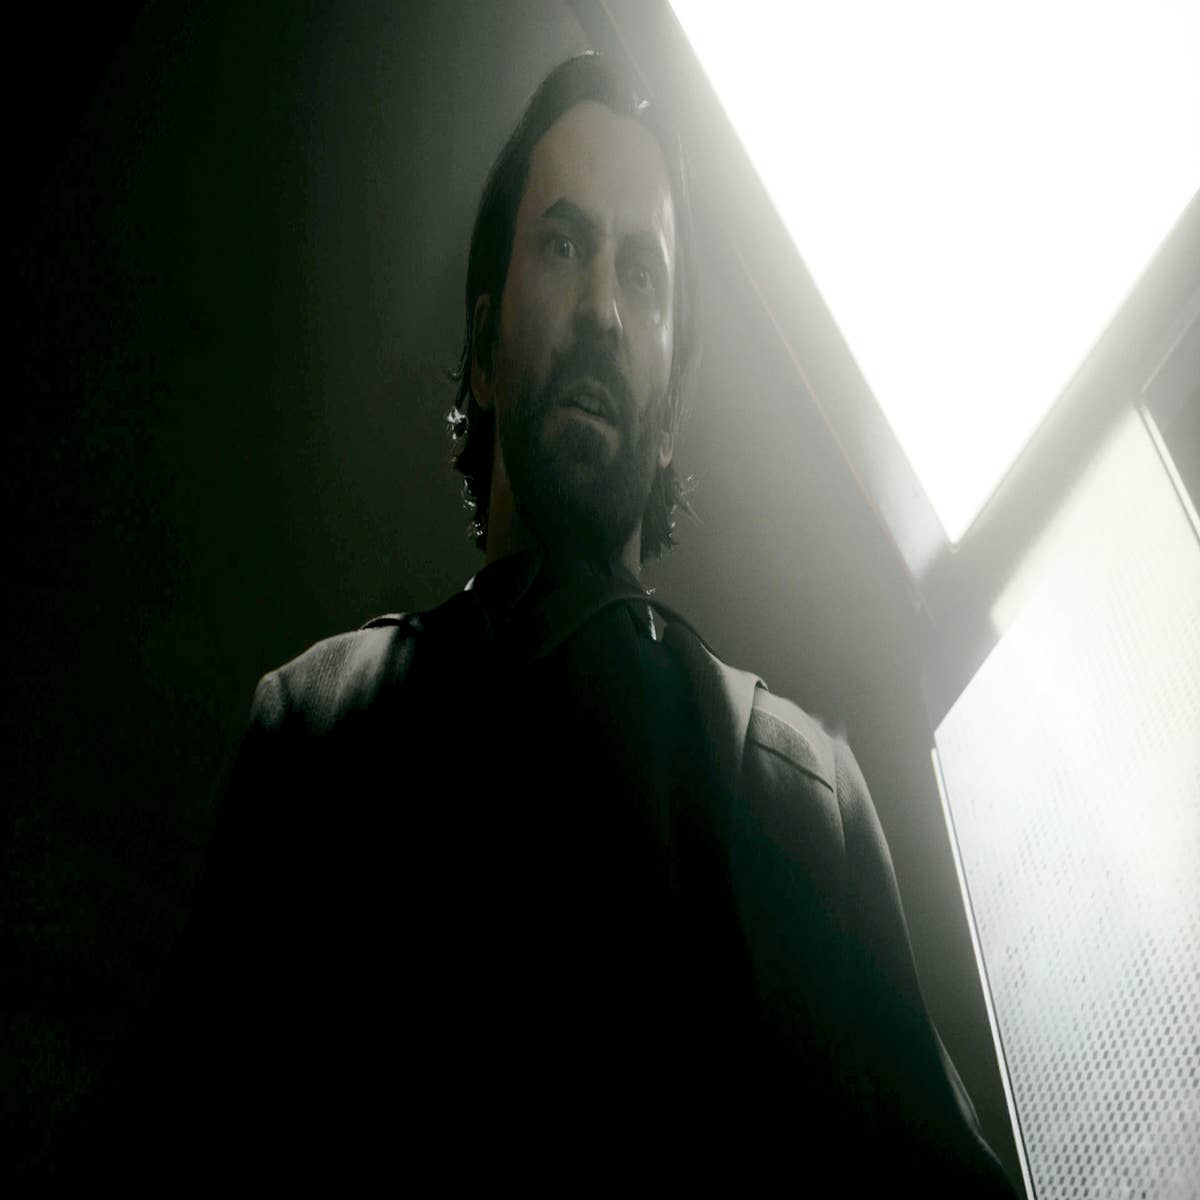 Remembering The Open-World 'Alan Wake' That We Never Got To Play